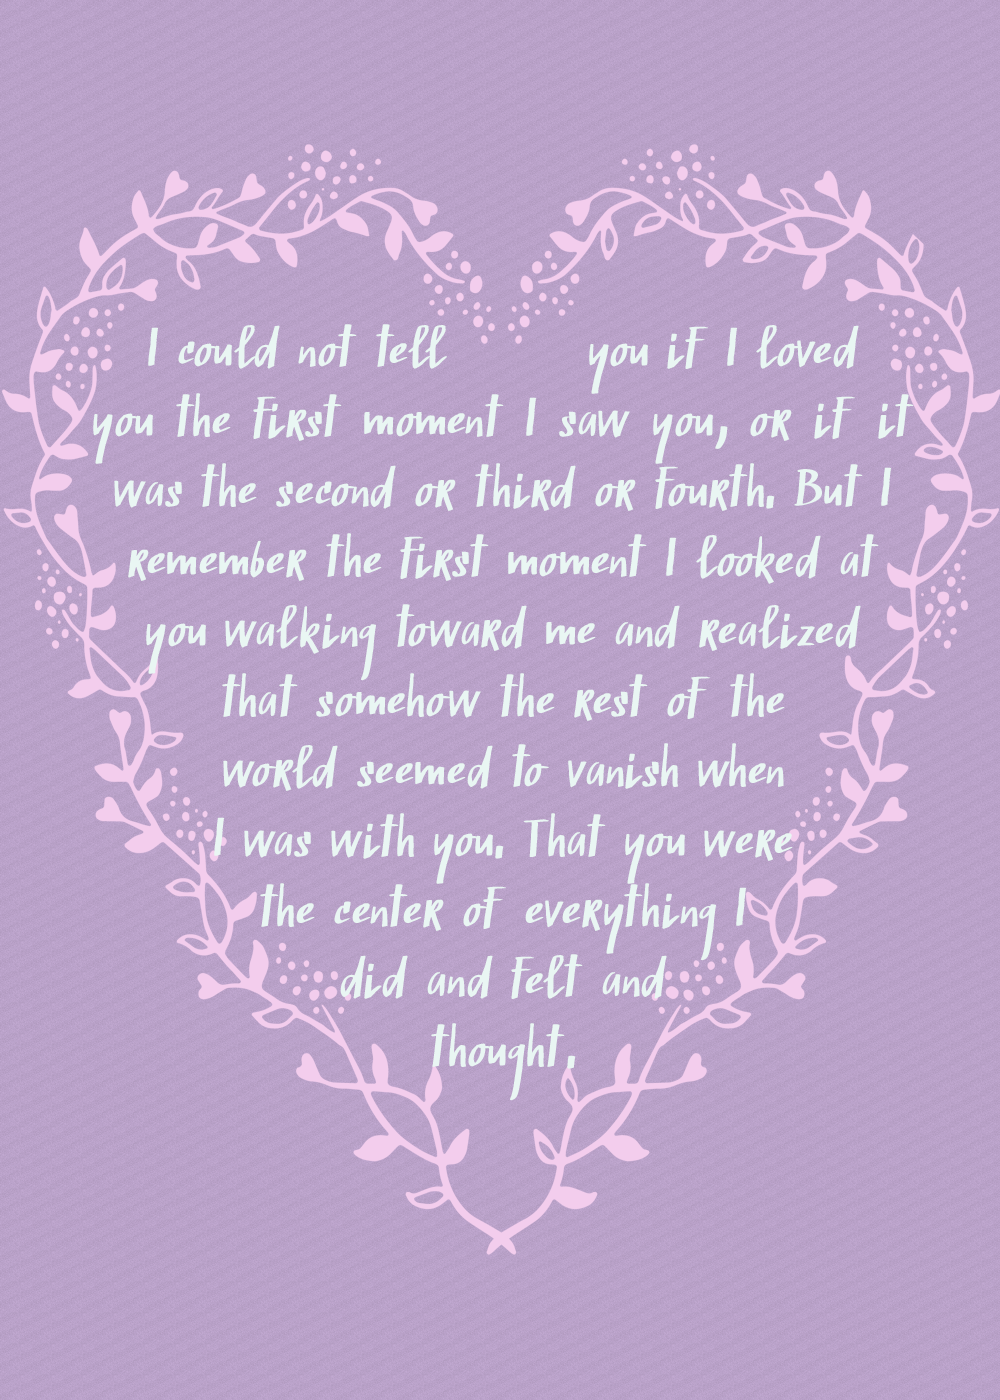 clockwork prince quote - i could not tell you if i loved you the first moment i saw you